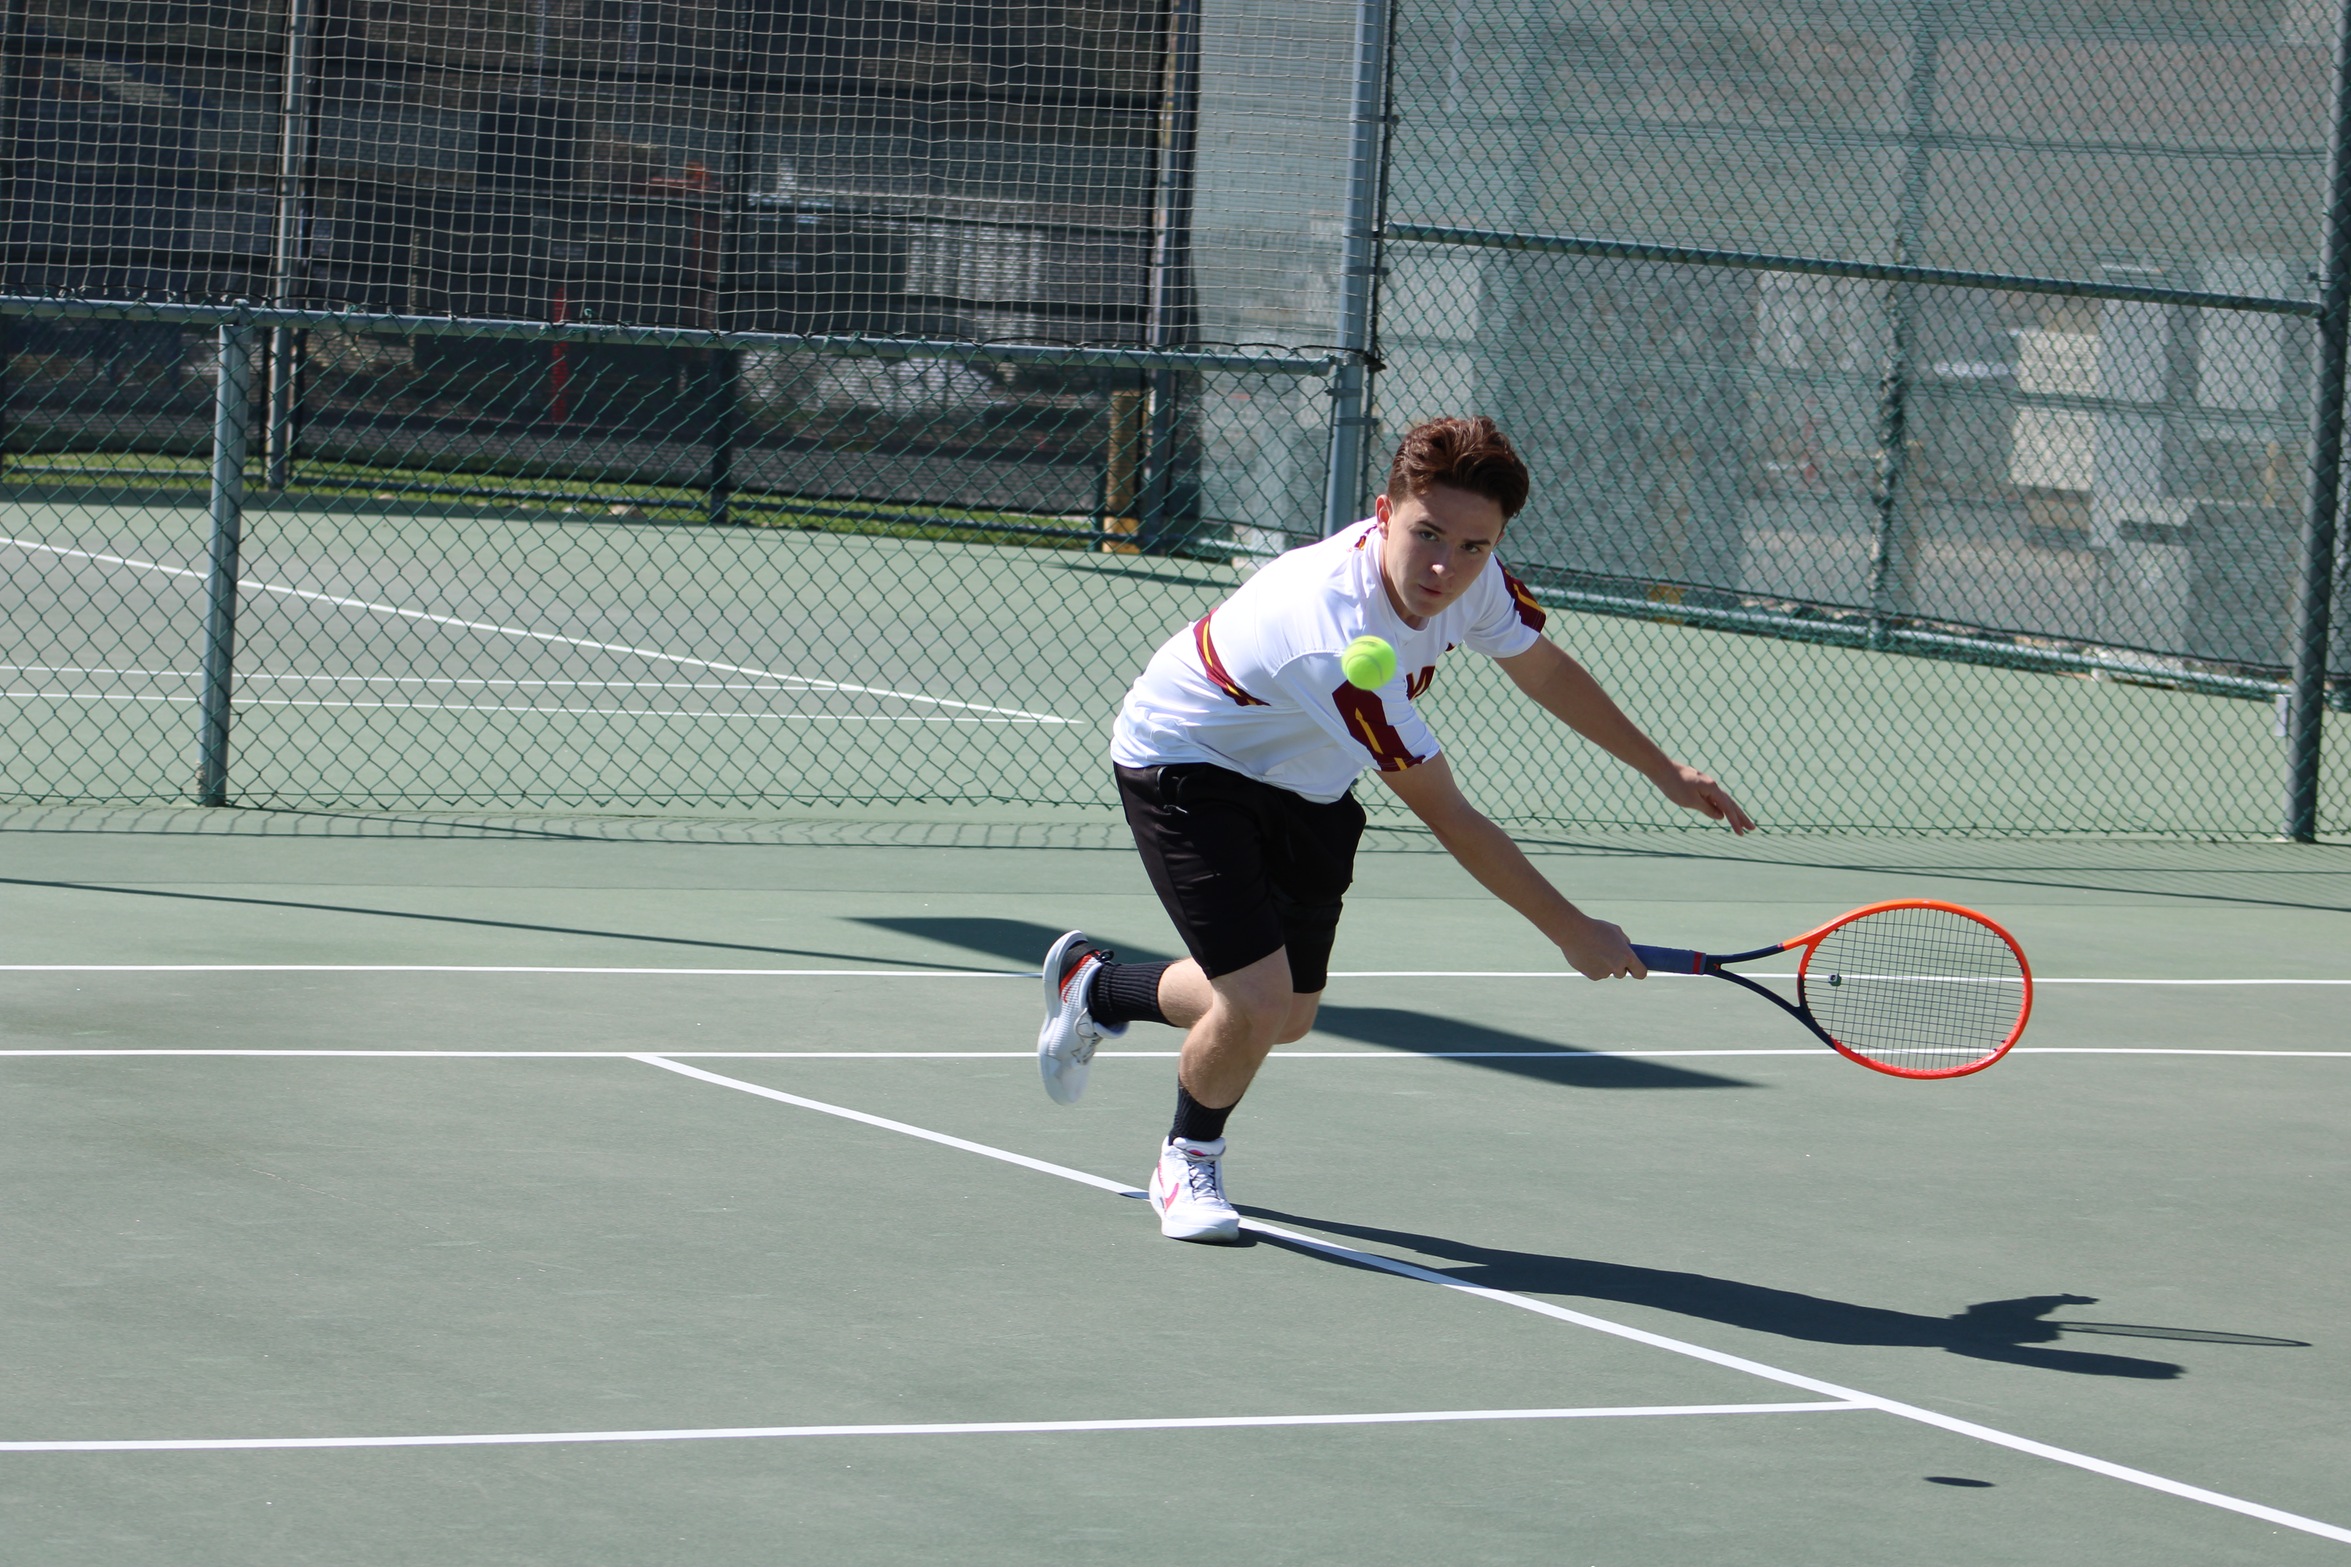 Men's Tennis Gets Their First Two Wins